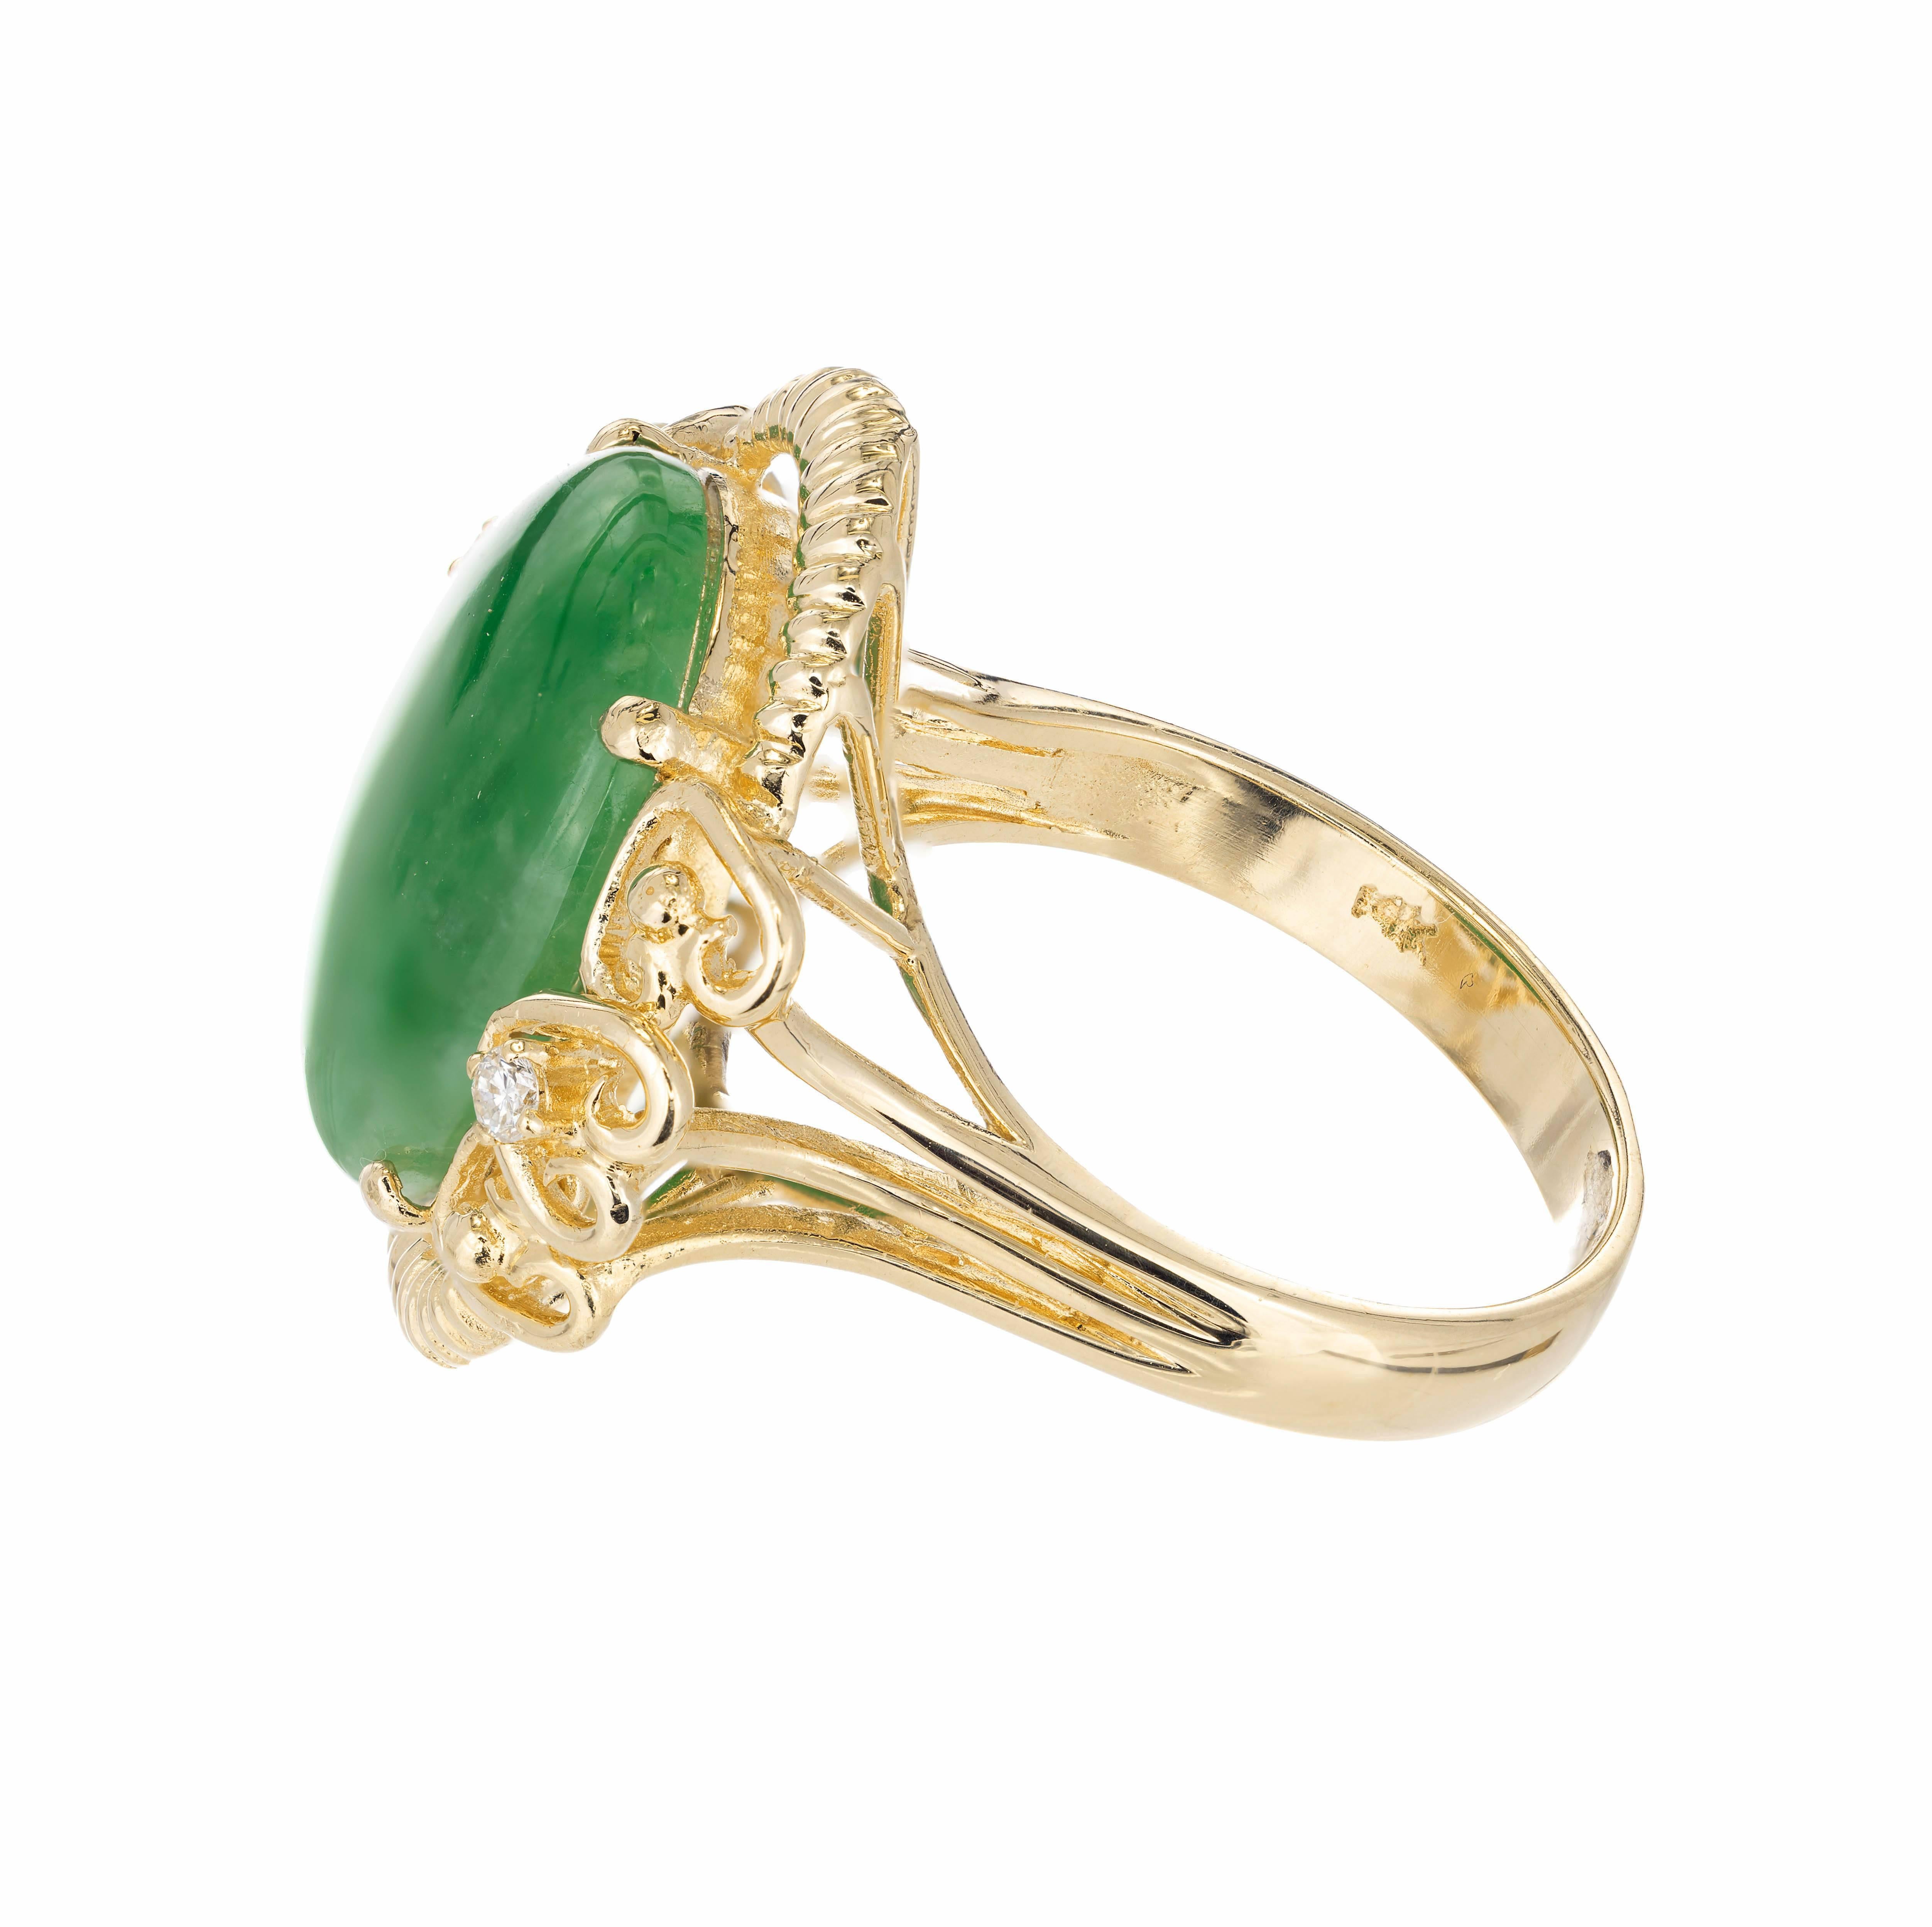 Oval Cut GIA Certified 6.33 Carat Cabochon Jadeite Jade Green Diamond Gold Cocktail Ring For Sale